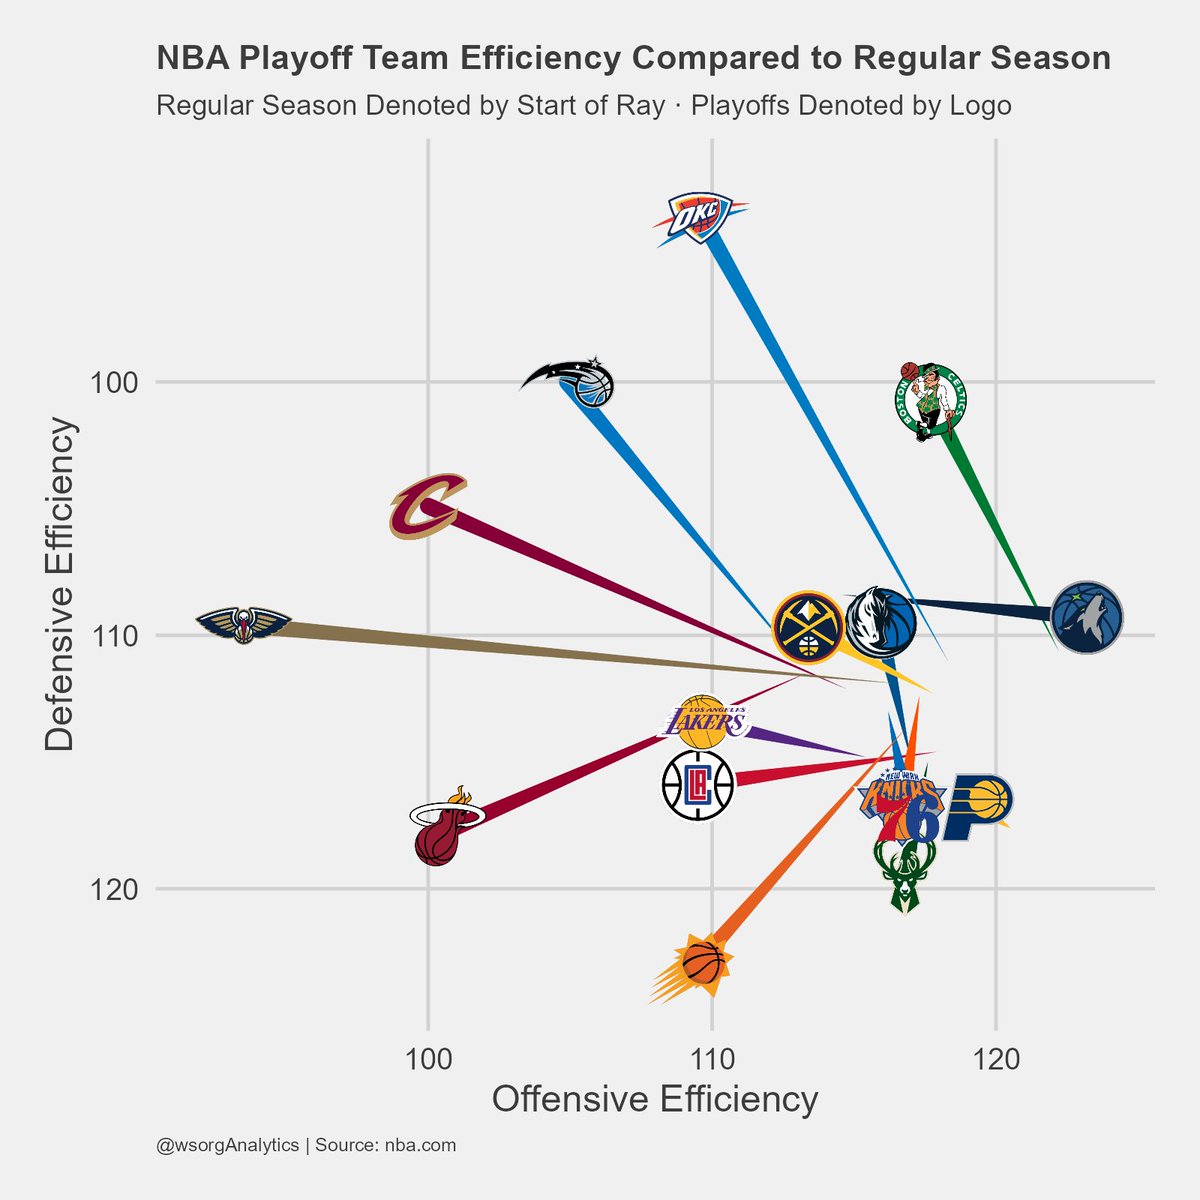 NBA team efficiency through the first round of the playoffs compared to the regular season. As expected, most teams' offensive efficiency decreased. Minnesota was the only team that saw a substantial improvement in offensive efficiency.